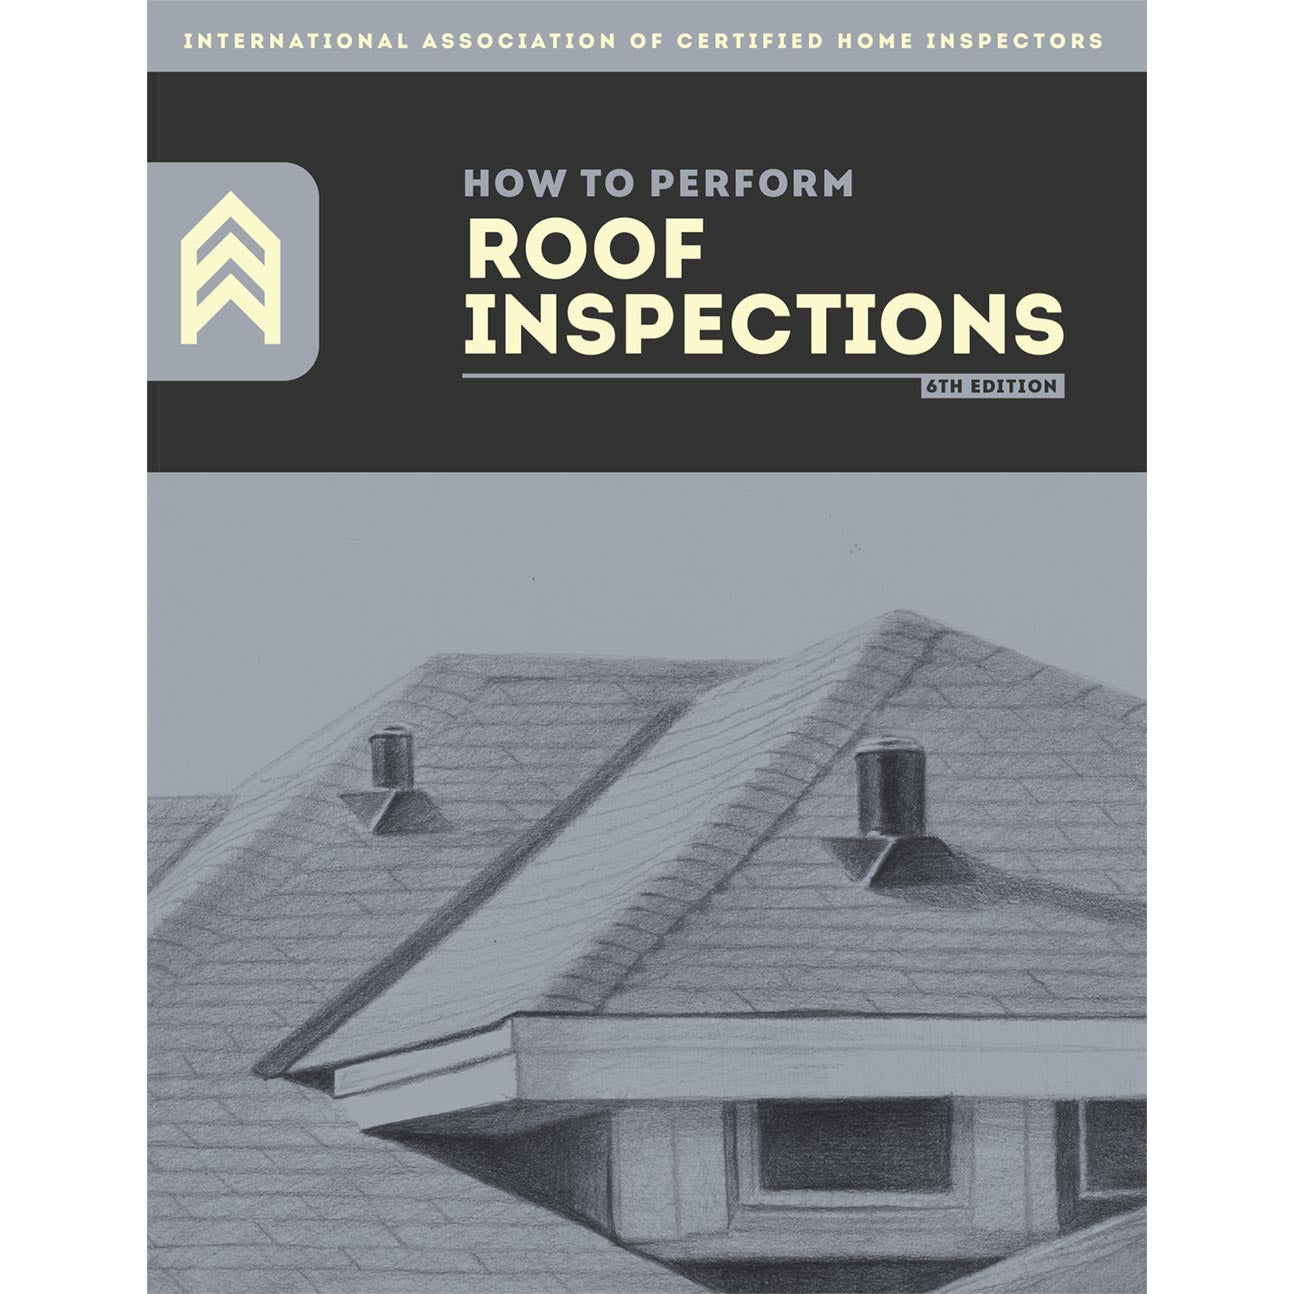 How to Perform Roof Inspections PDF Download